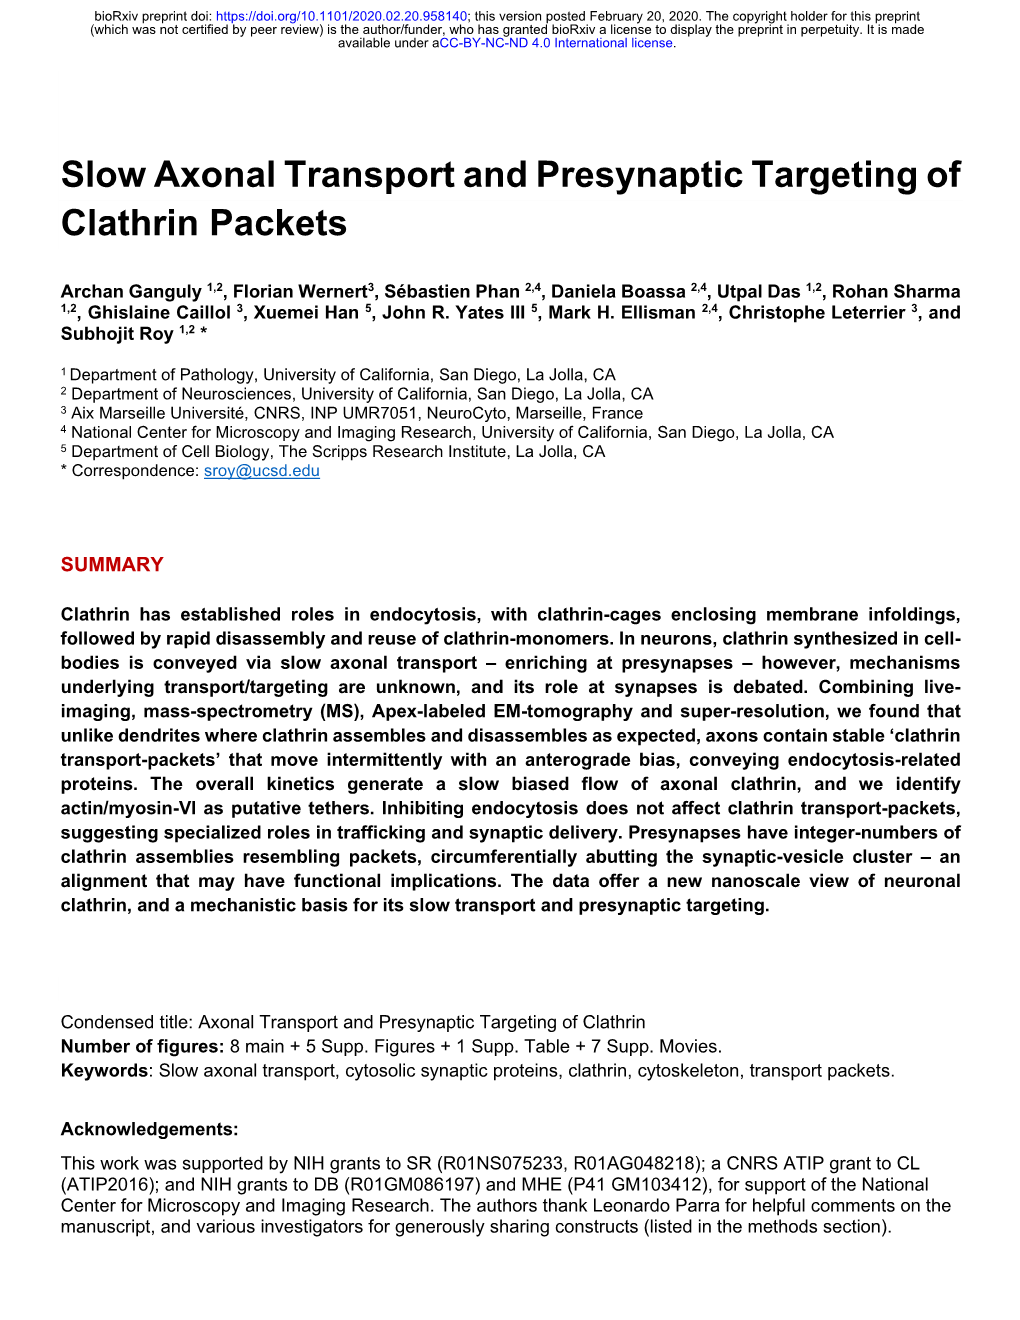 Slow Axonal Transport and Presynaptic Targeting of Clathrin Packets